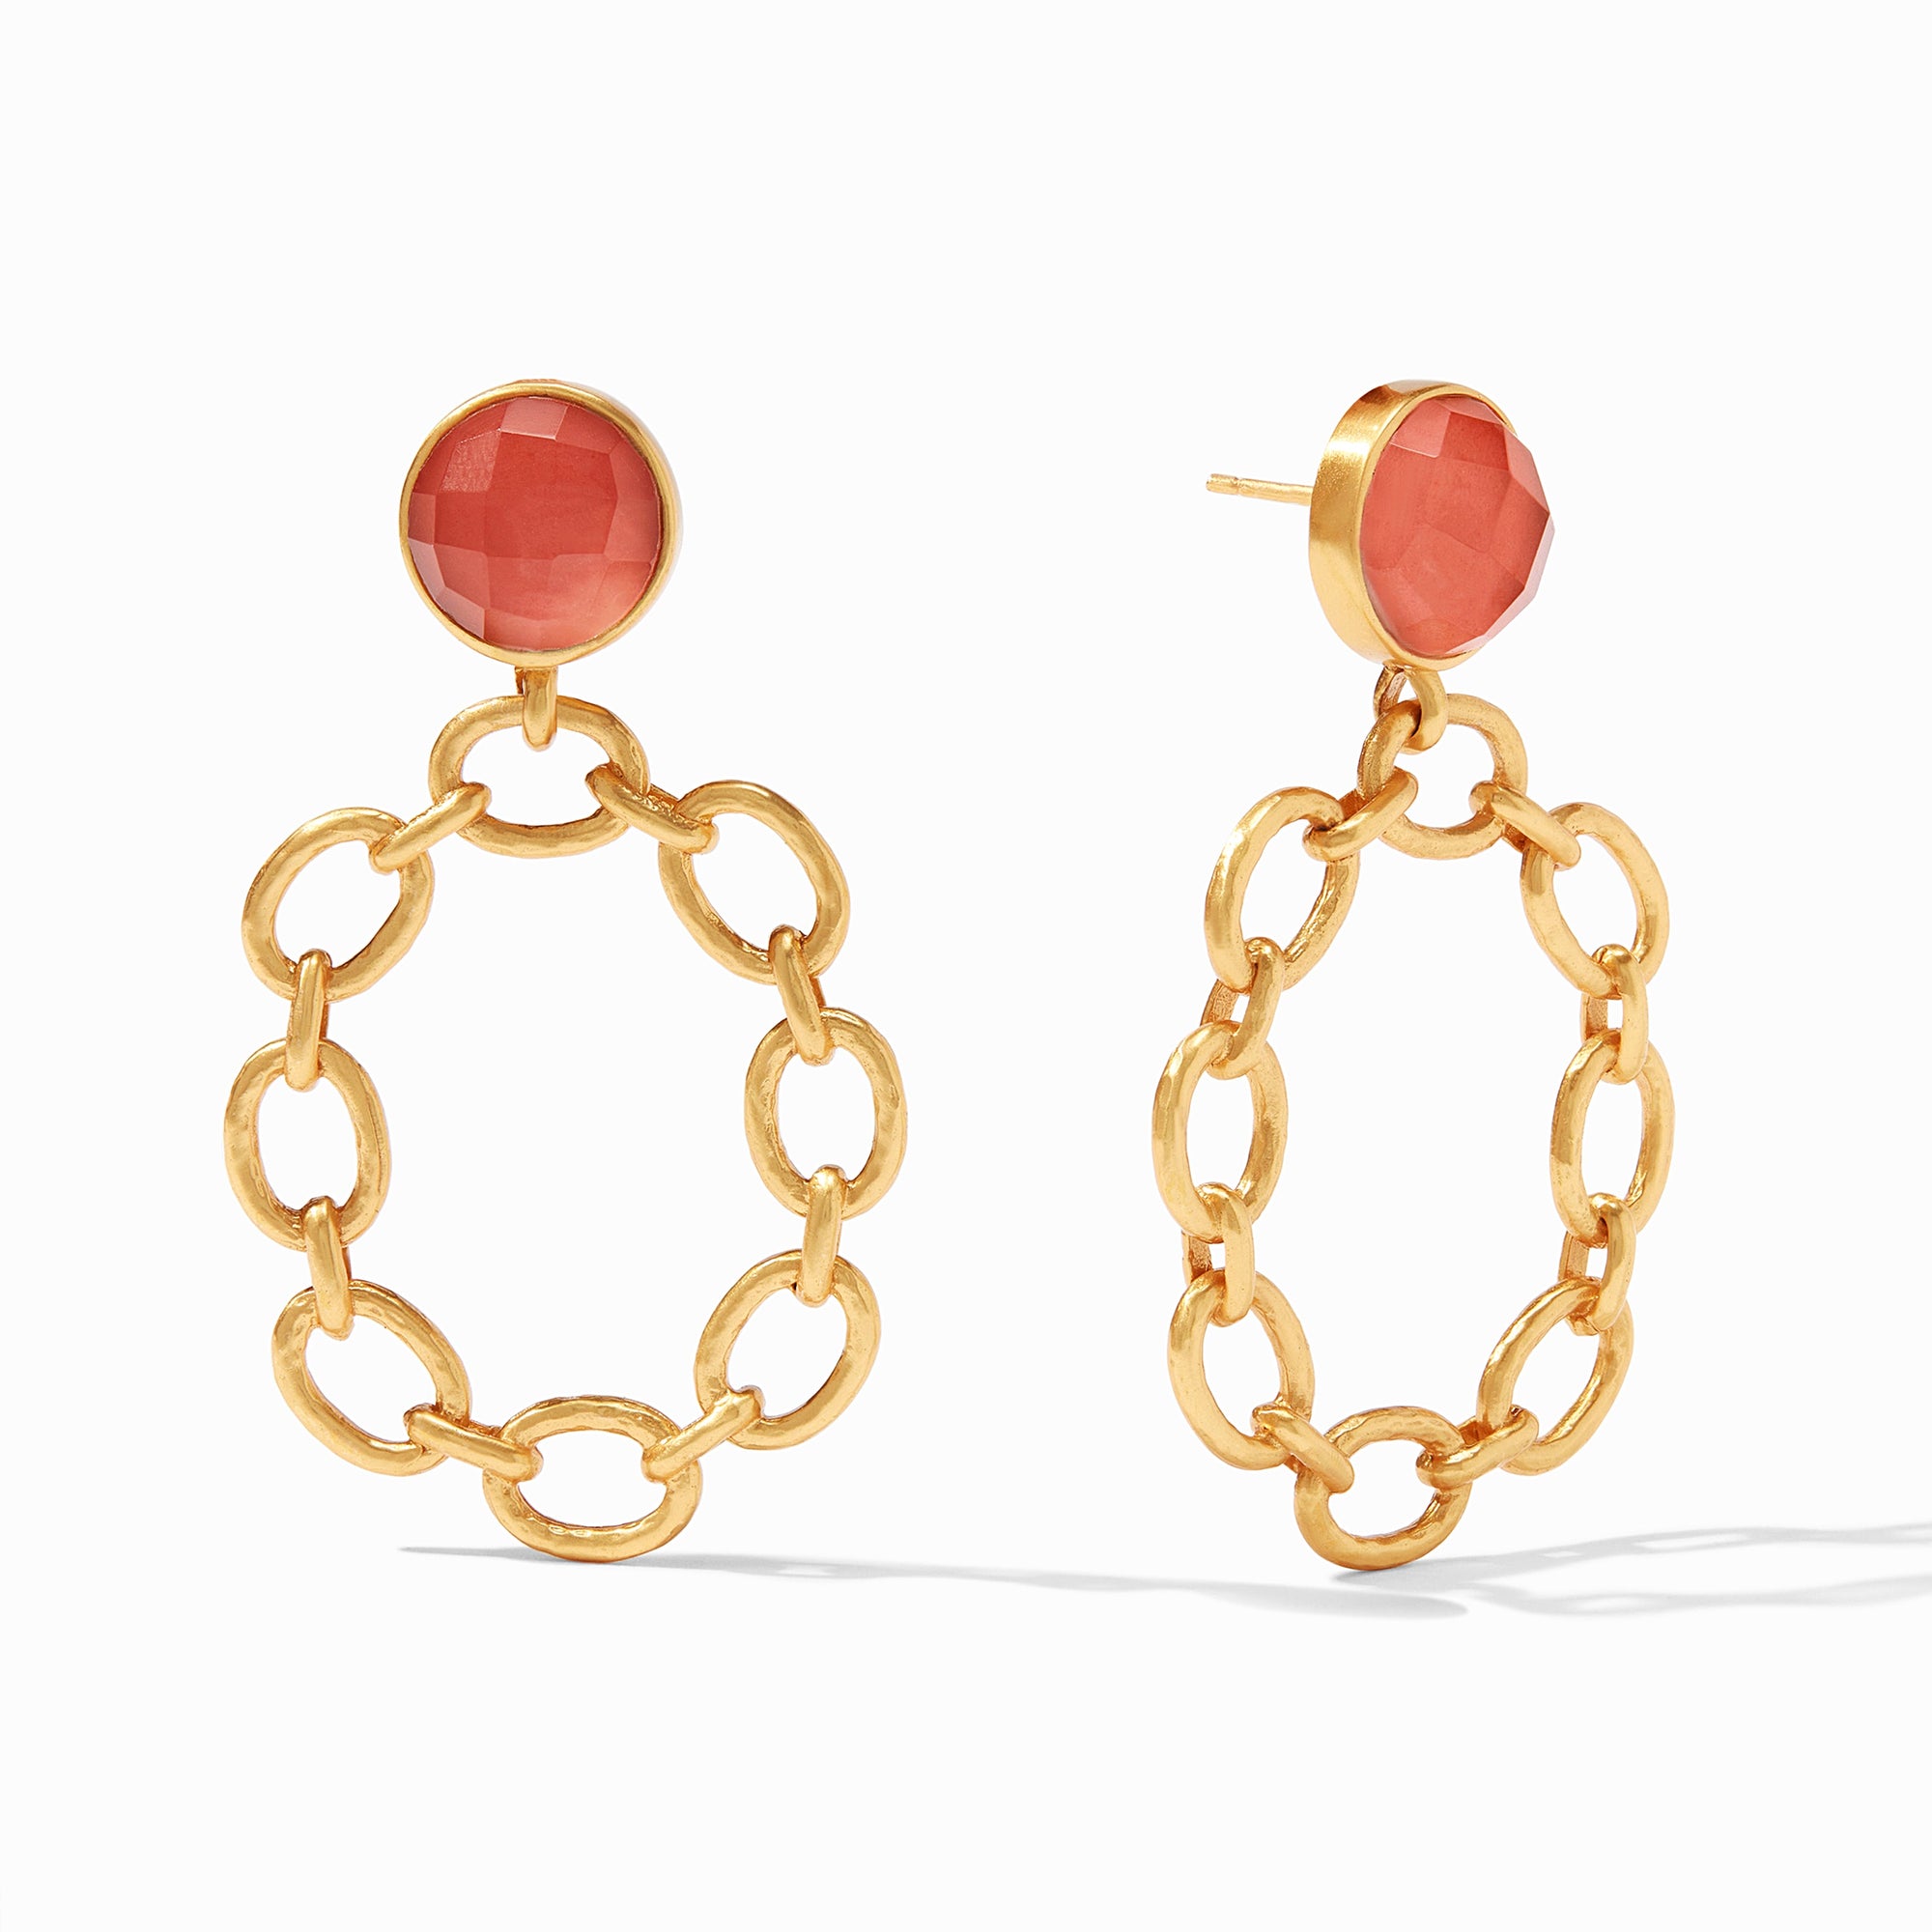 Julie Vos - Palermo Statement Earring, Iridescent Coral